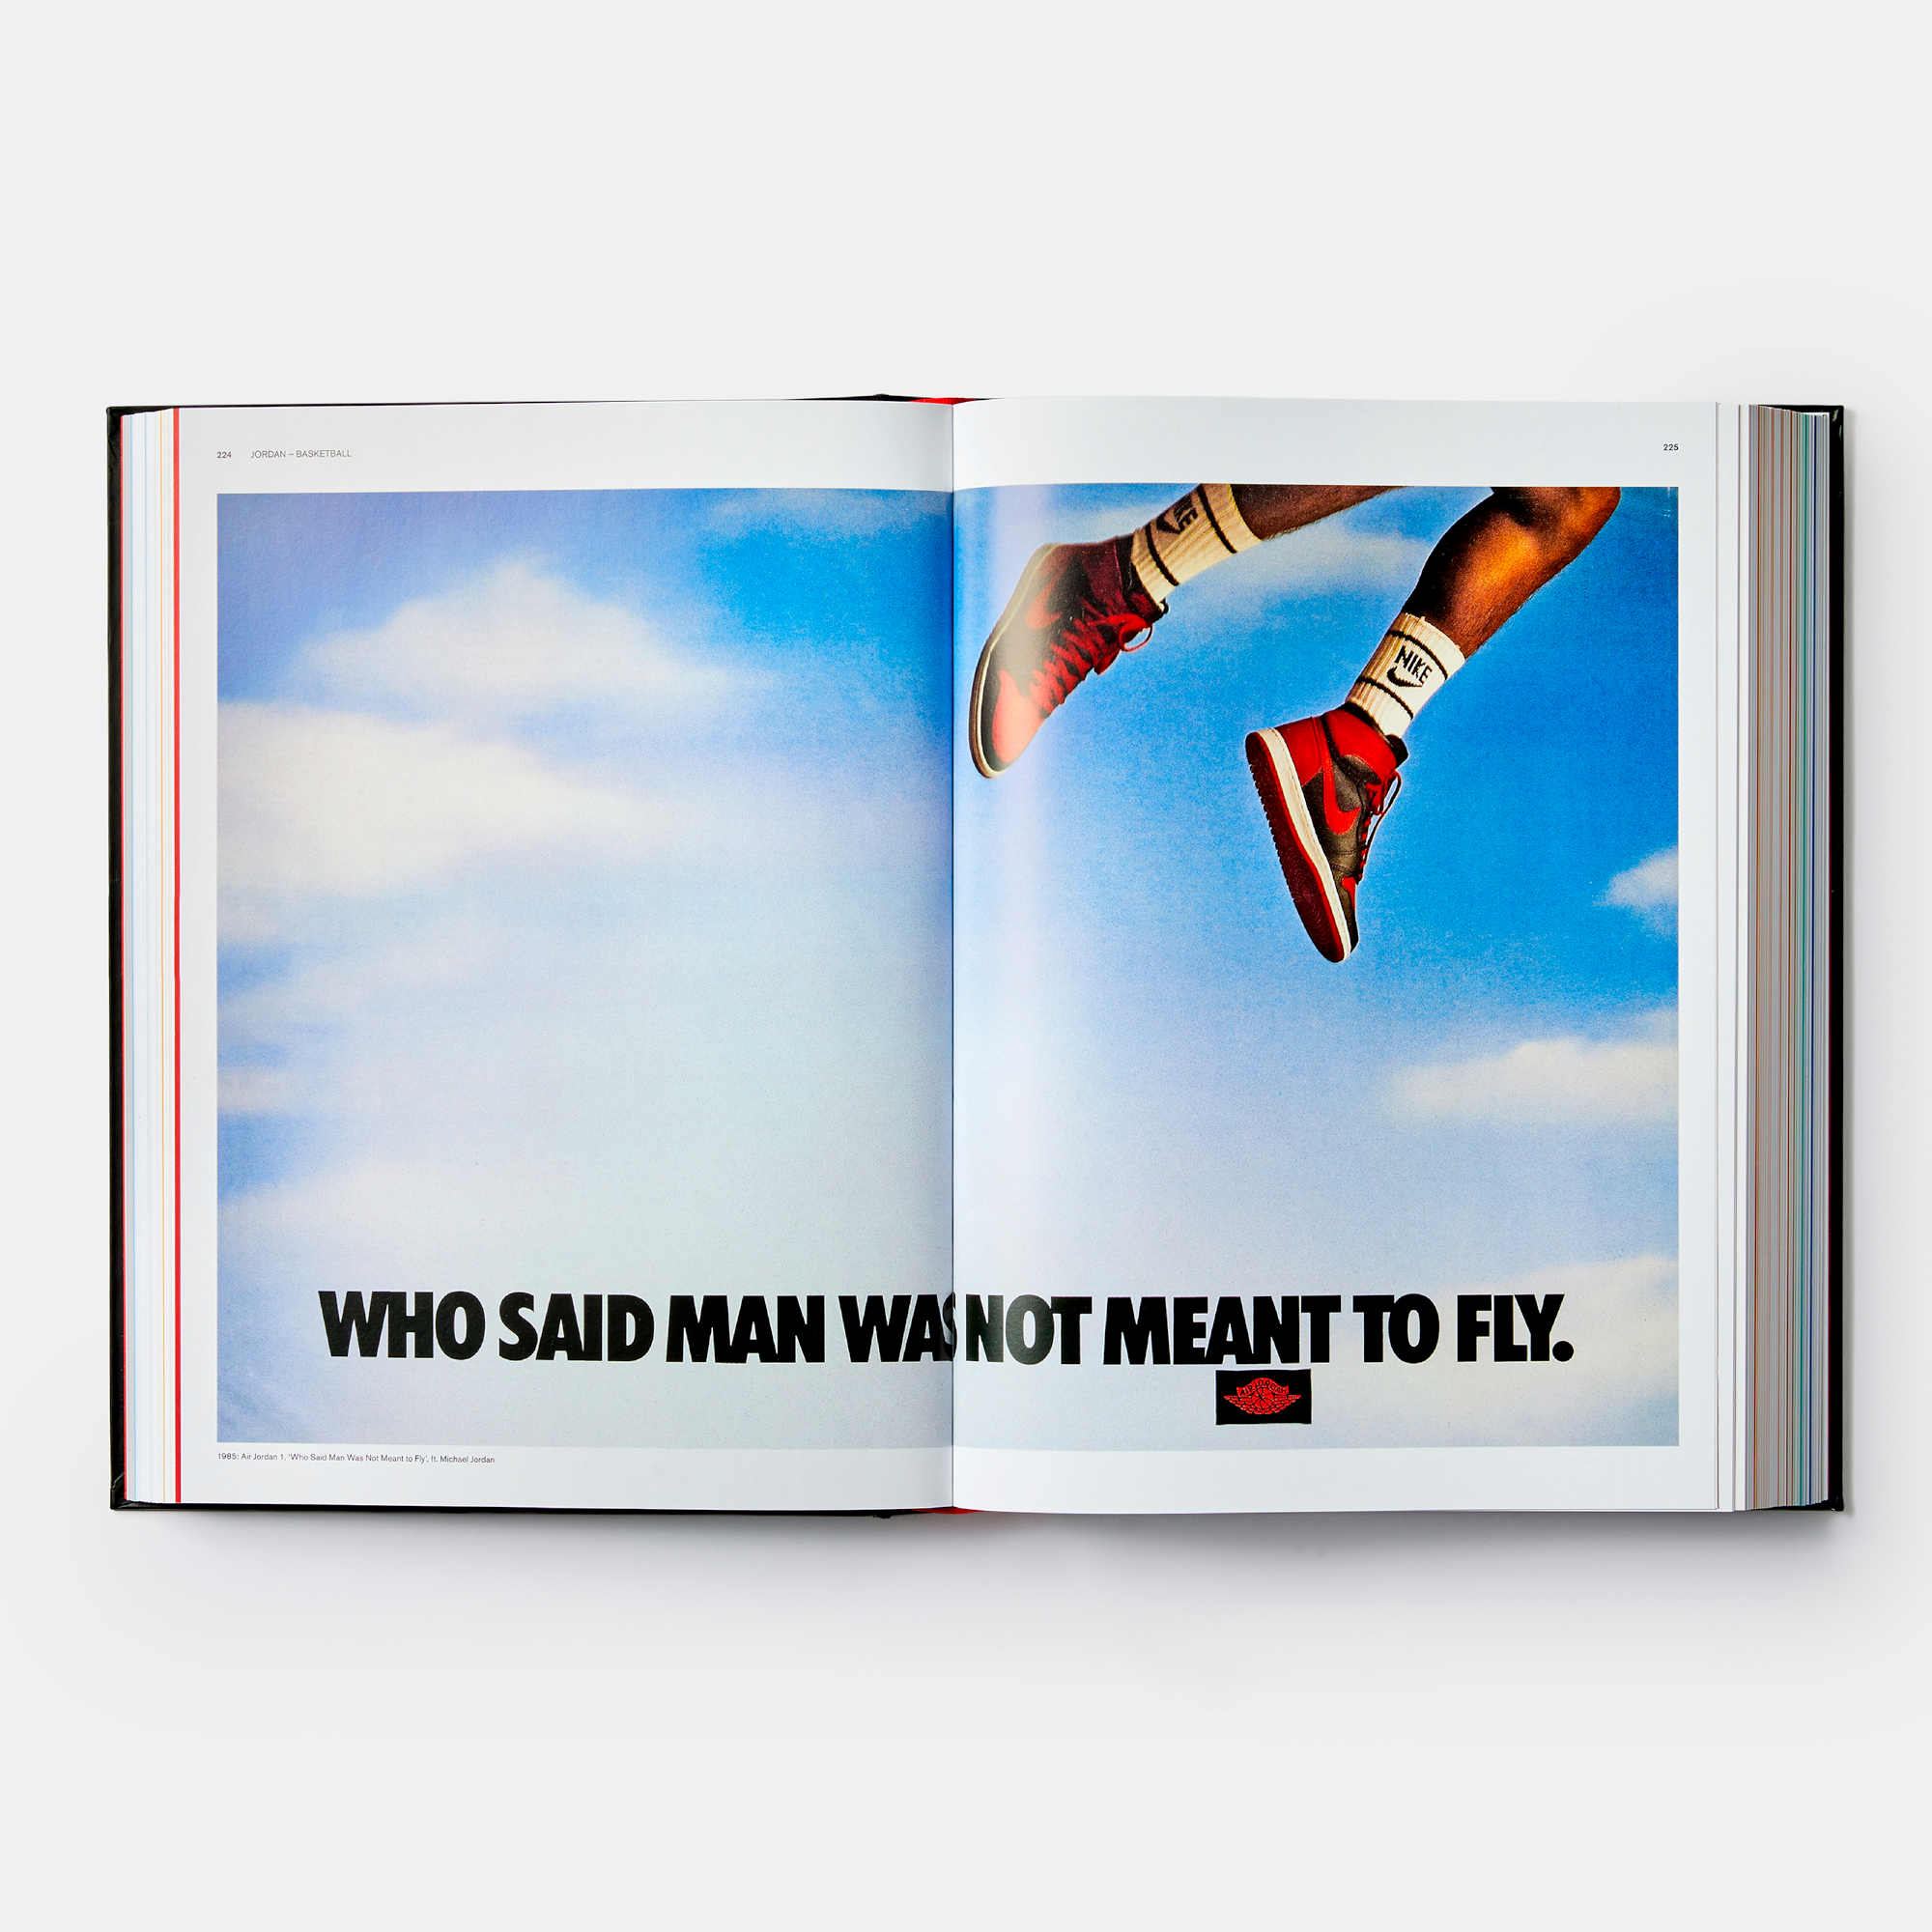 1985: Air Jordan 1, ‘Who Said Man Was Not Meant to Fly’, ft. Michael Jordan, from Soled Out